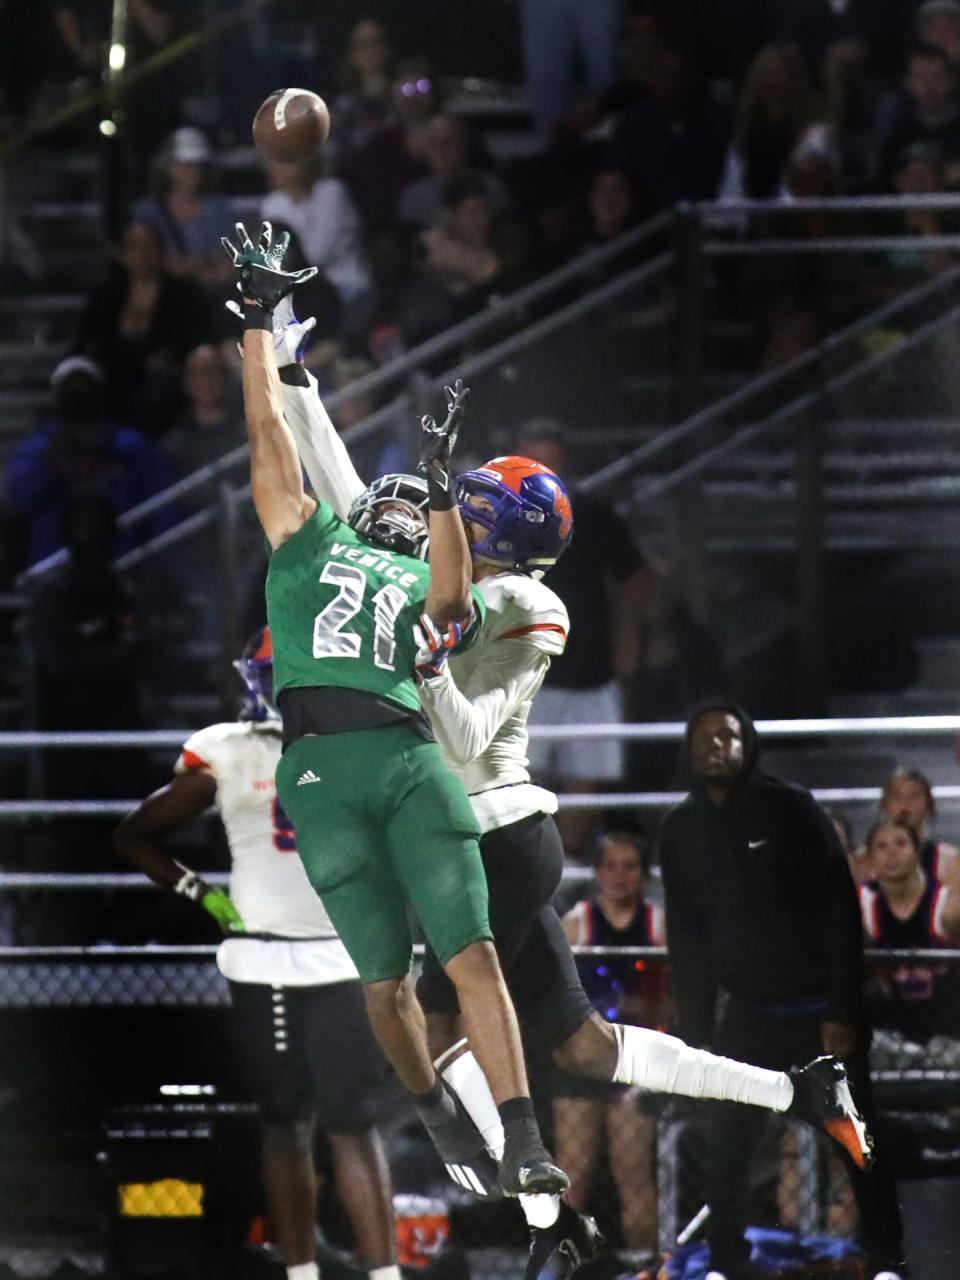 Venice defensive back Elliot Washington (21) reaches for the ball ahead of West Orange receiver Jayden Gibson (1) on a mid-air interception in the end zone during Class 8A-Region 3 playoff football action in Venice. MATT HOUSTON/HERALD-TRIBUNE